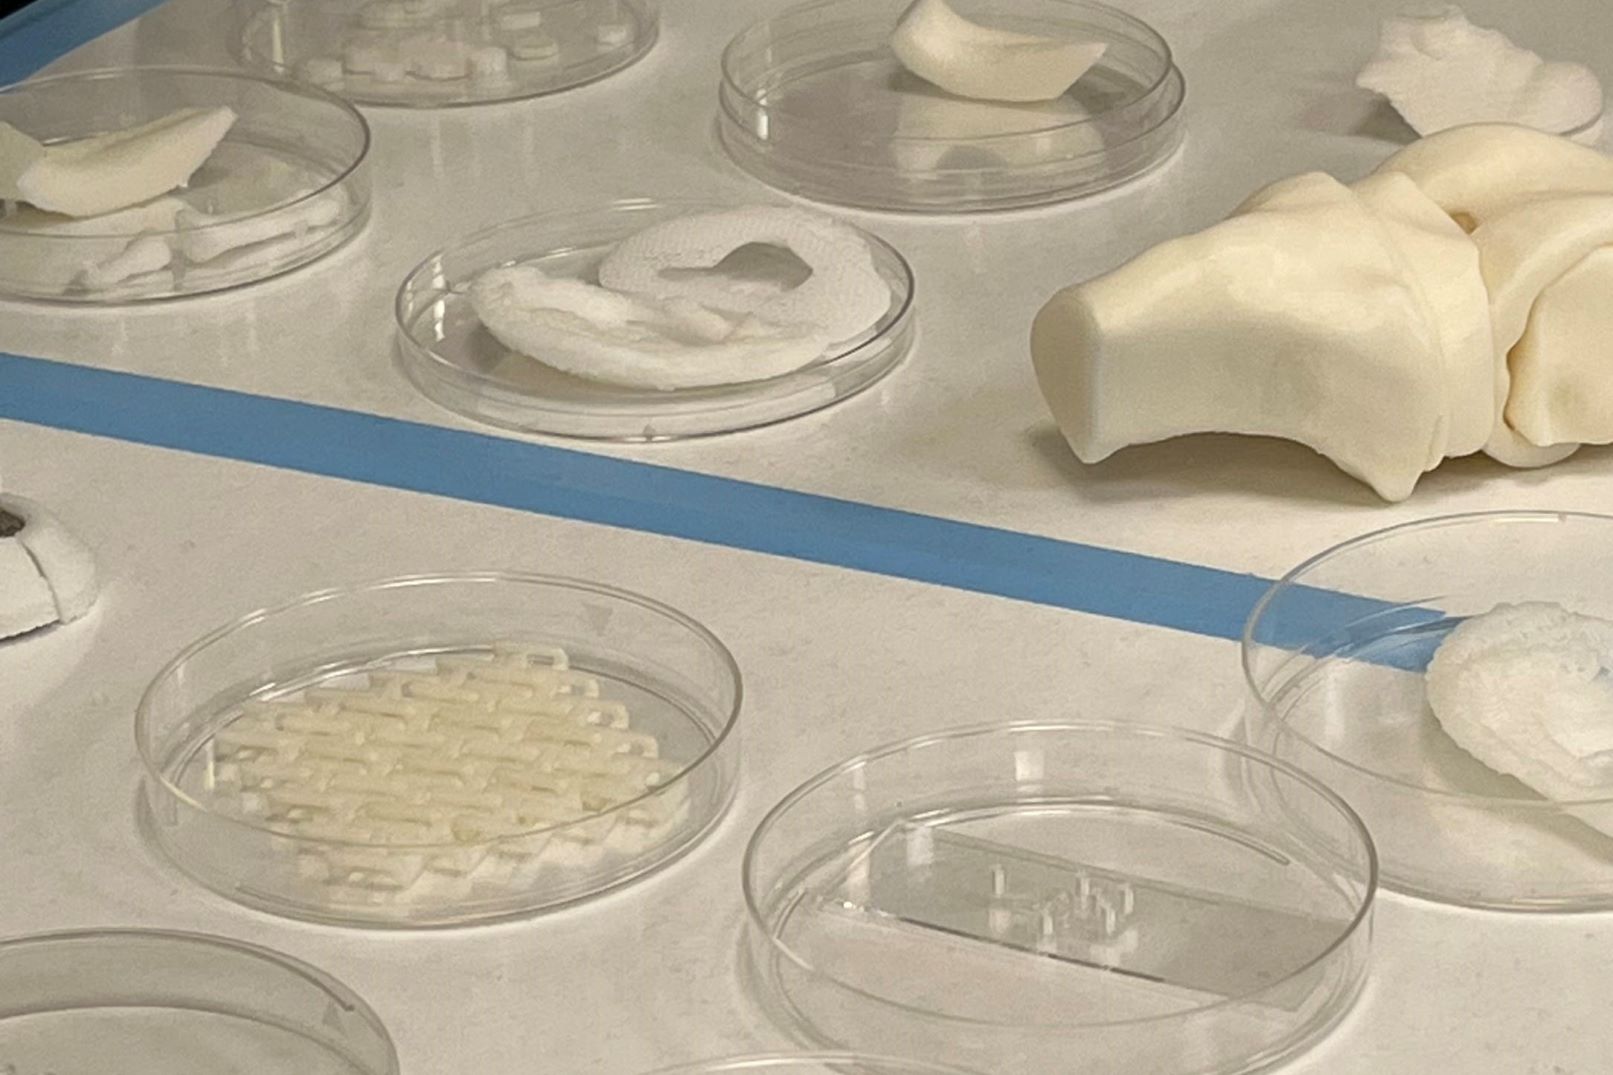 3D bioprinted parts from WFIRM